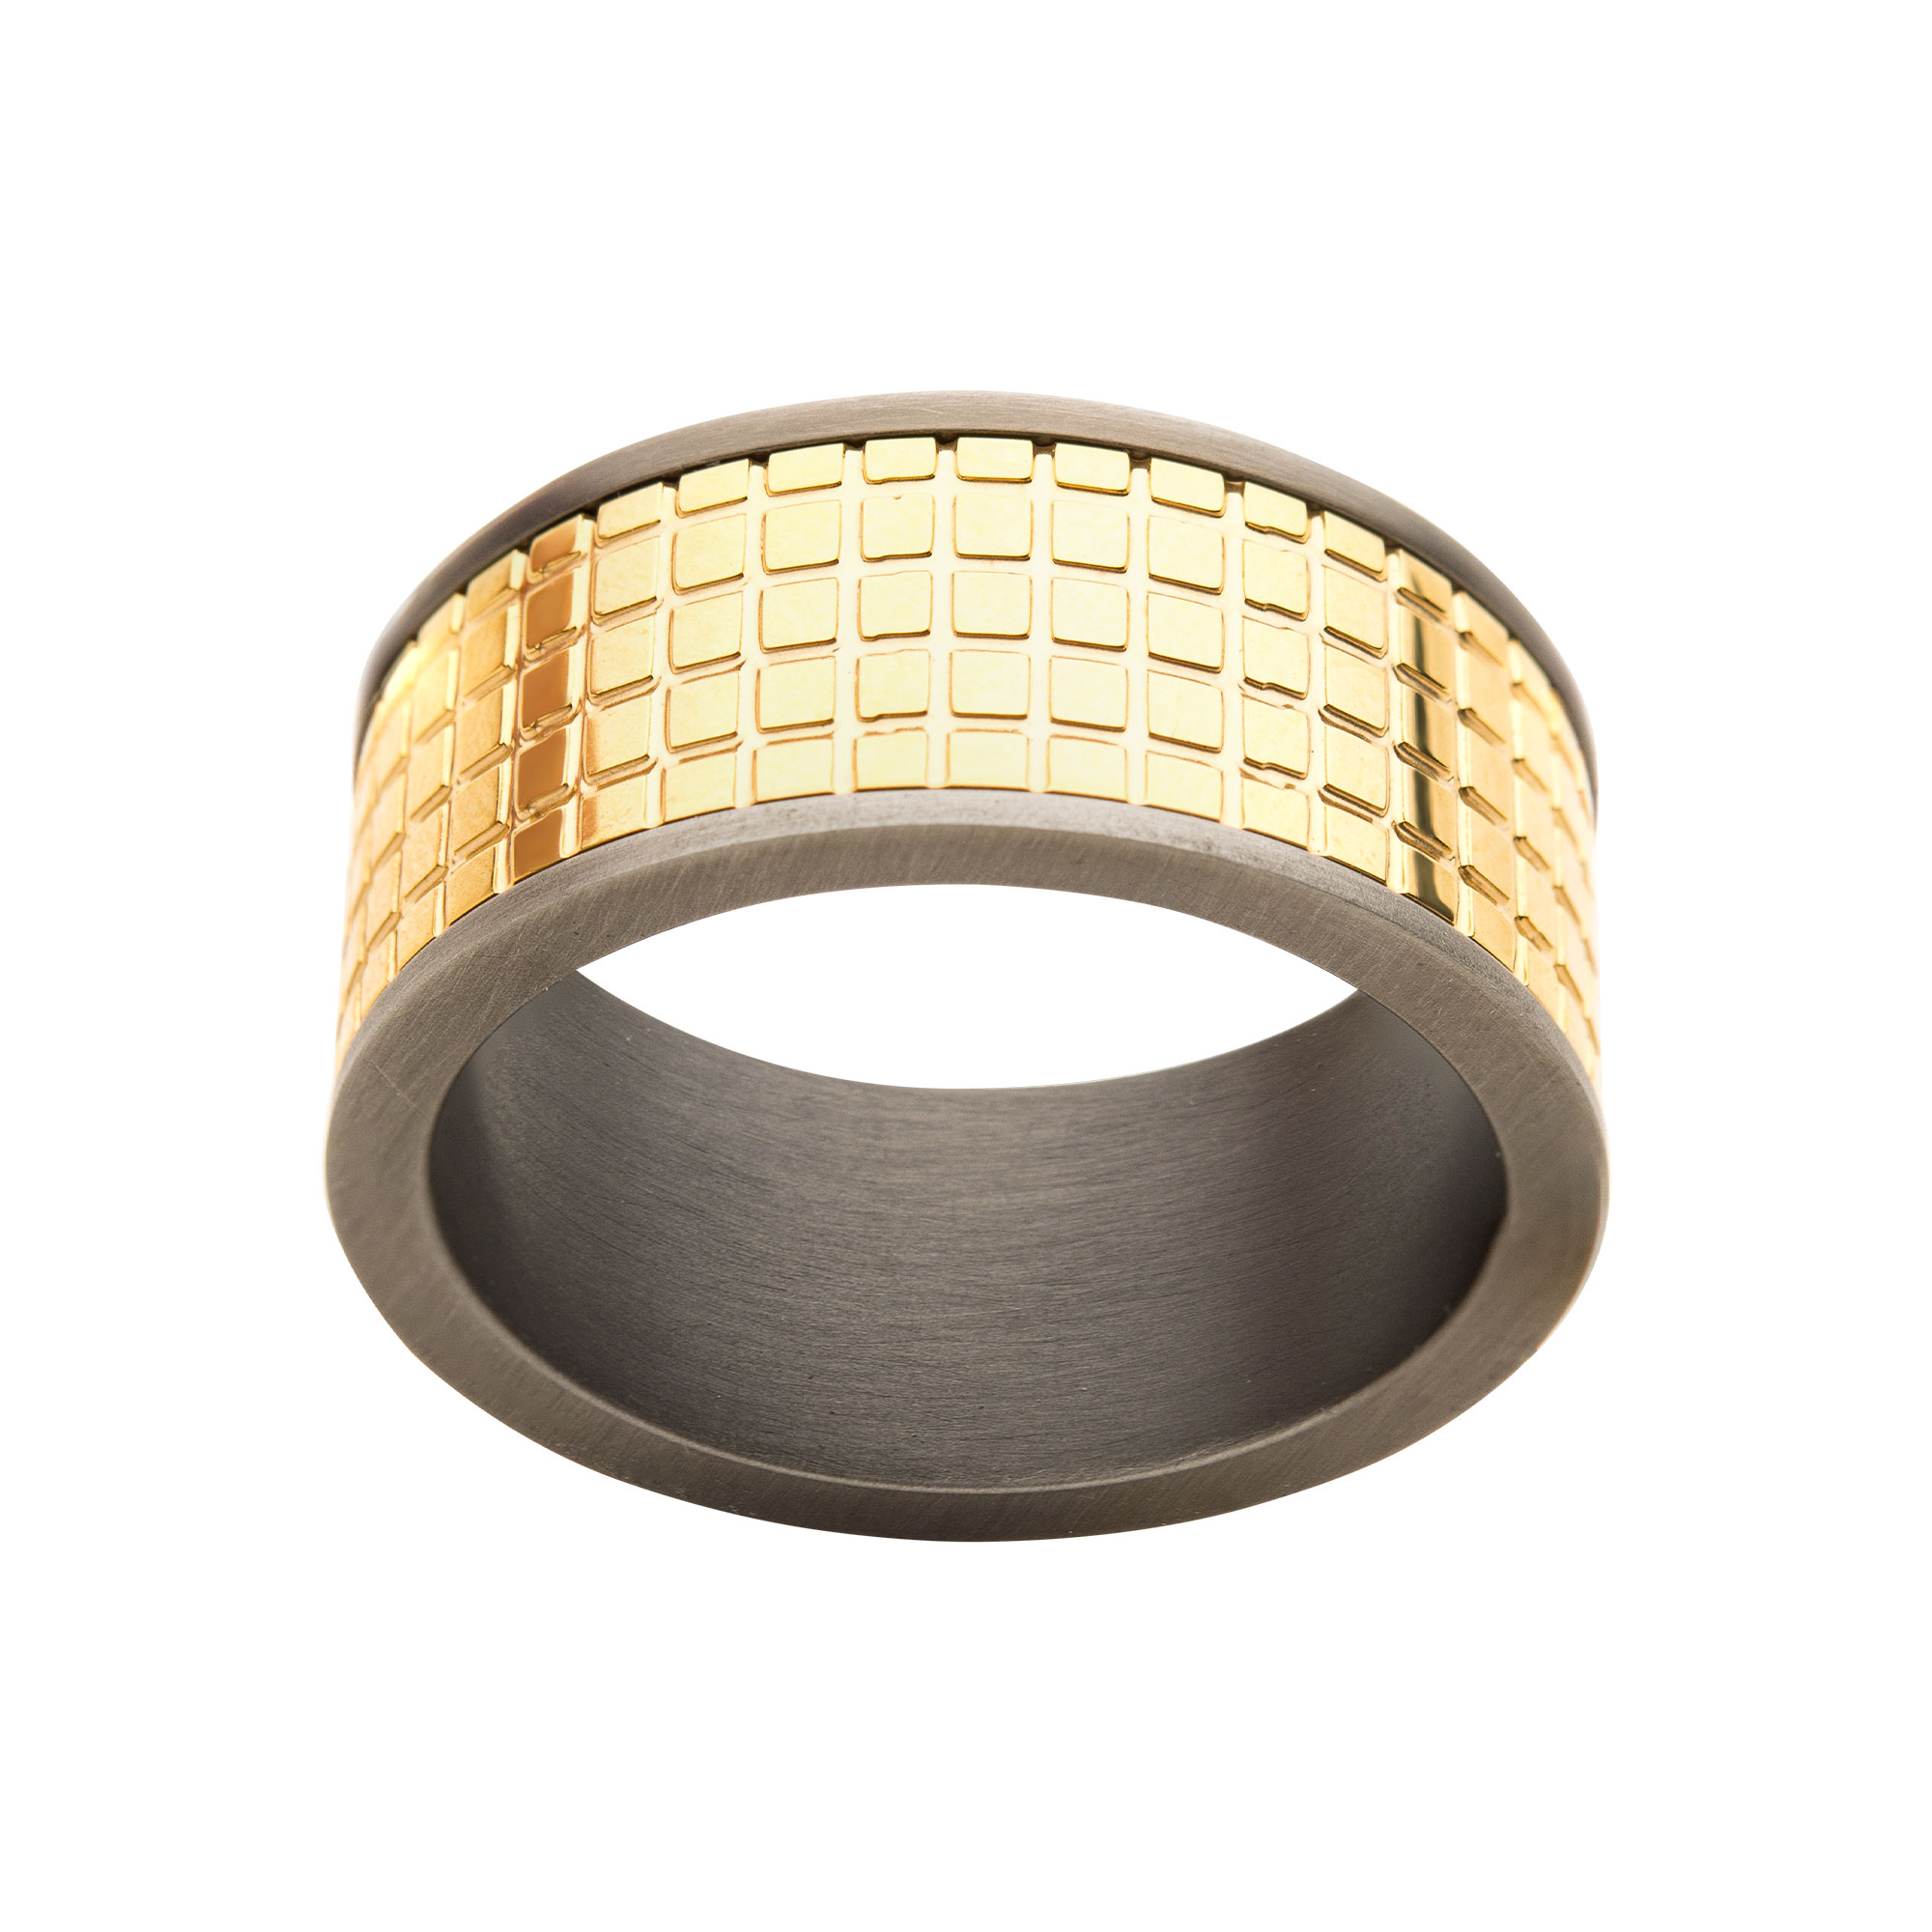 Gun Metal Plated with 18K Gold Plated Grid Inlay Ring Image 2 P.K. Bennett Jewelers Mundelein, IL